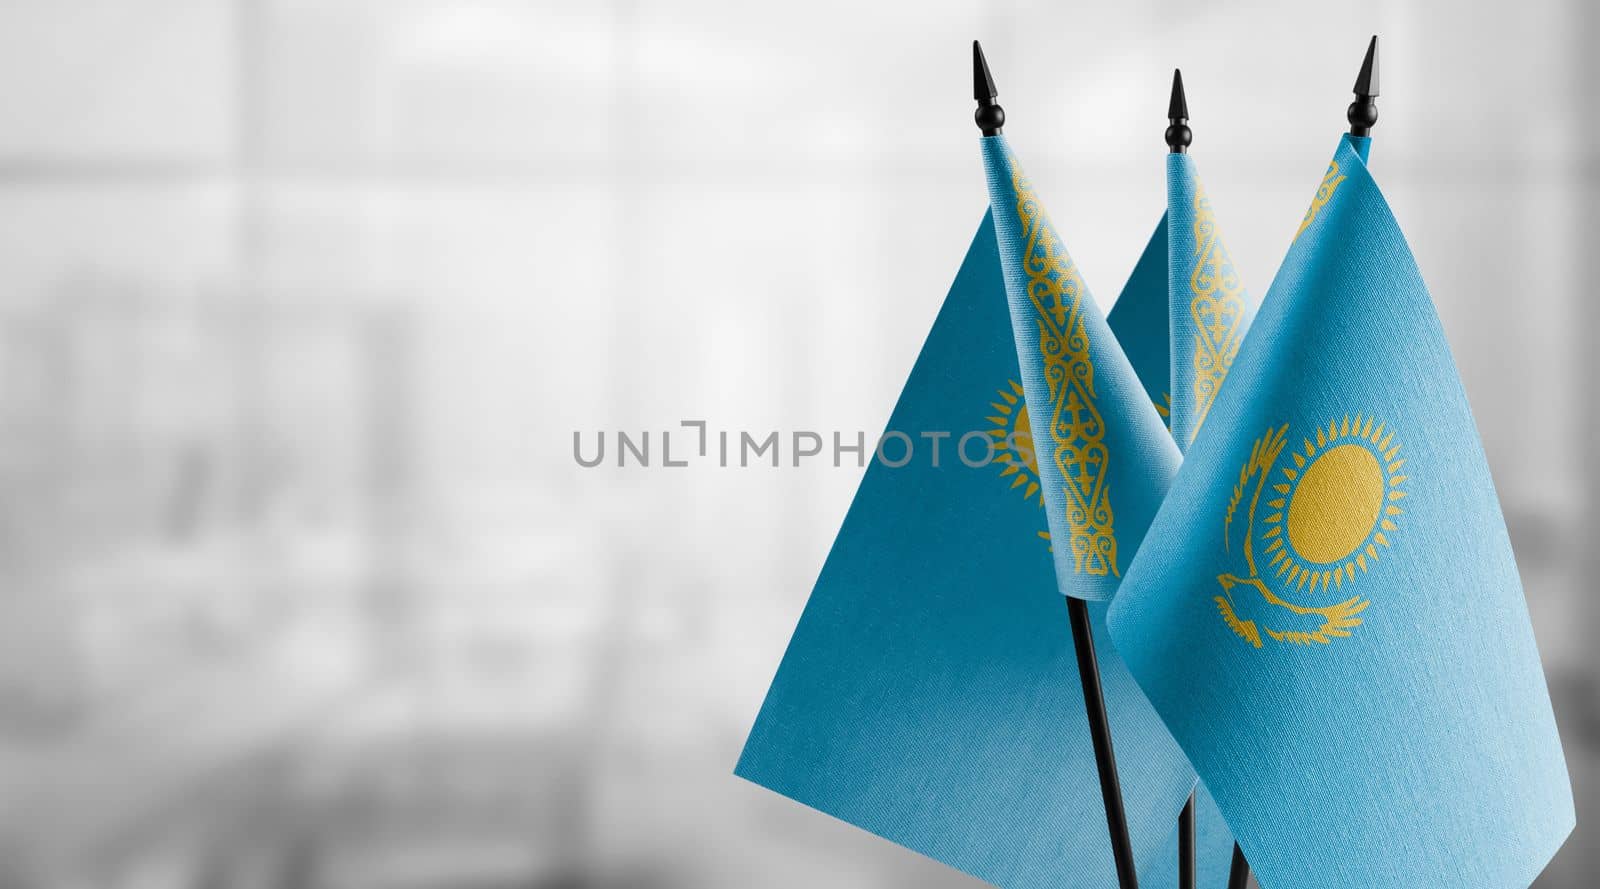 A small Kazakhstan flag on an abstract blurry background by butenkow